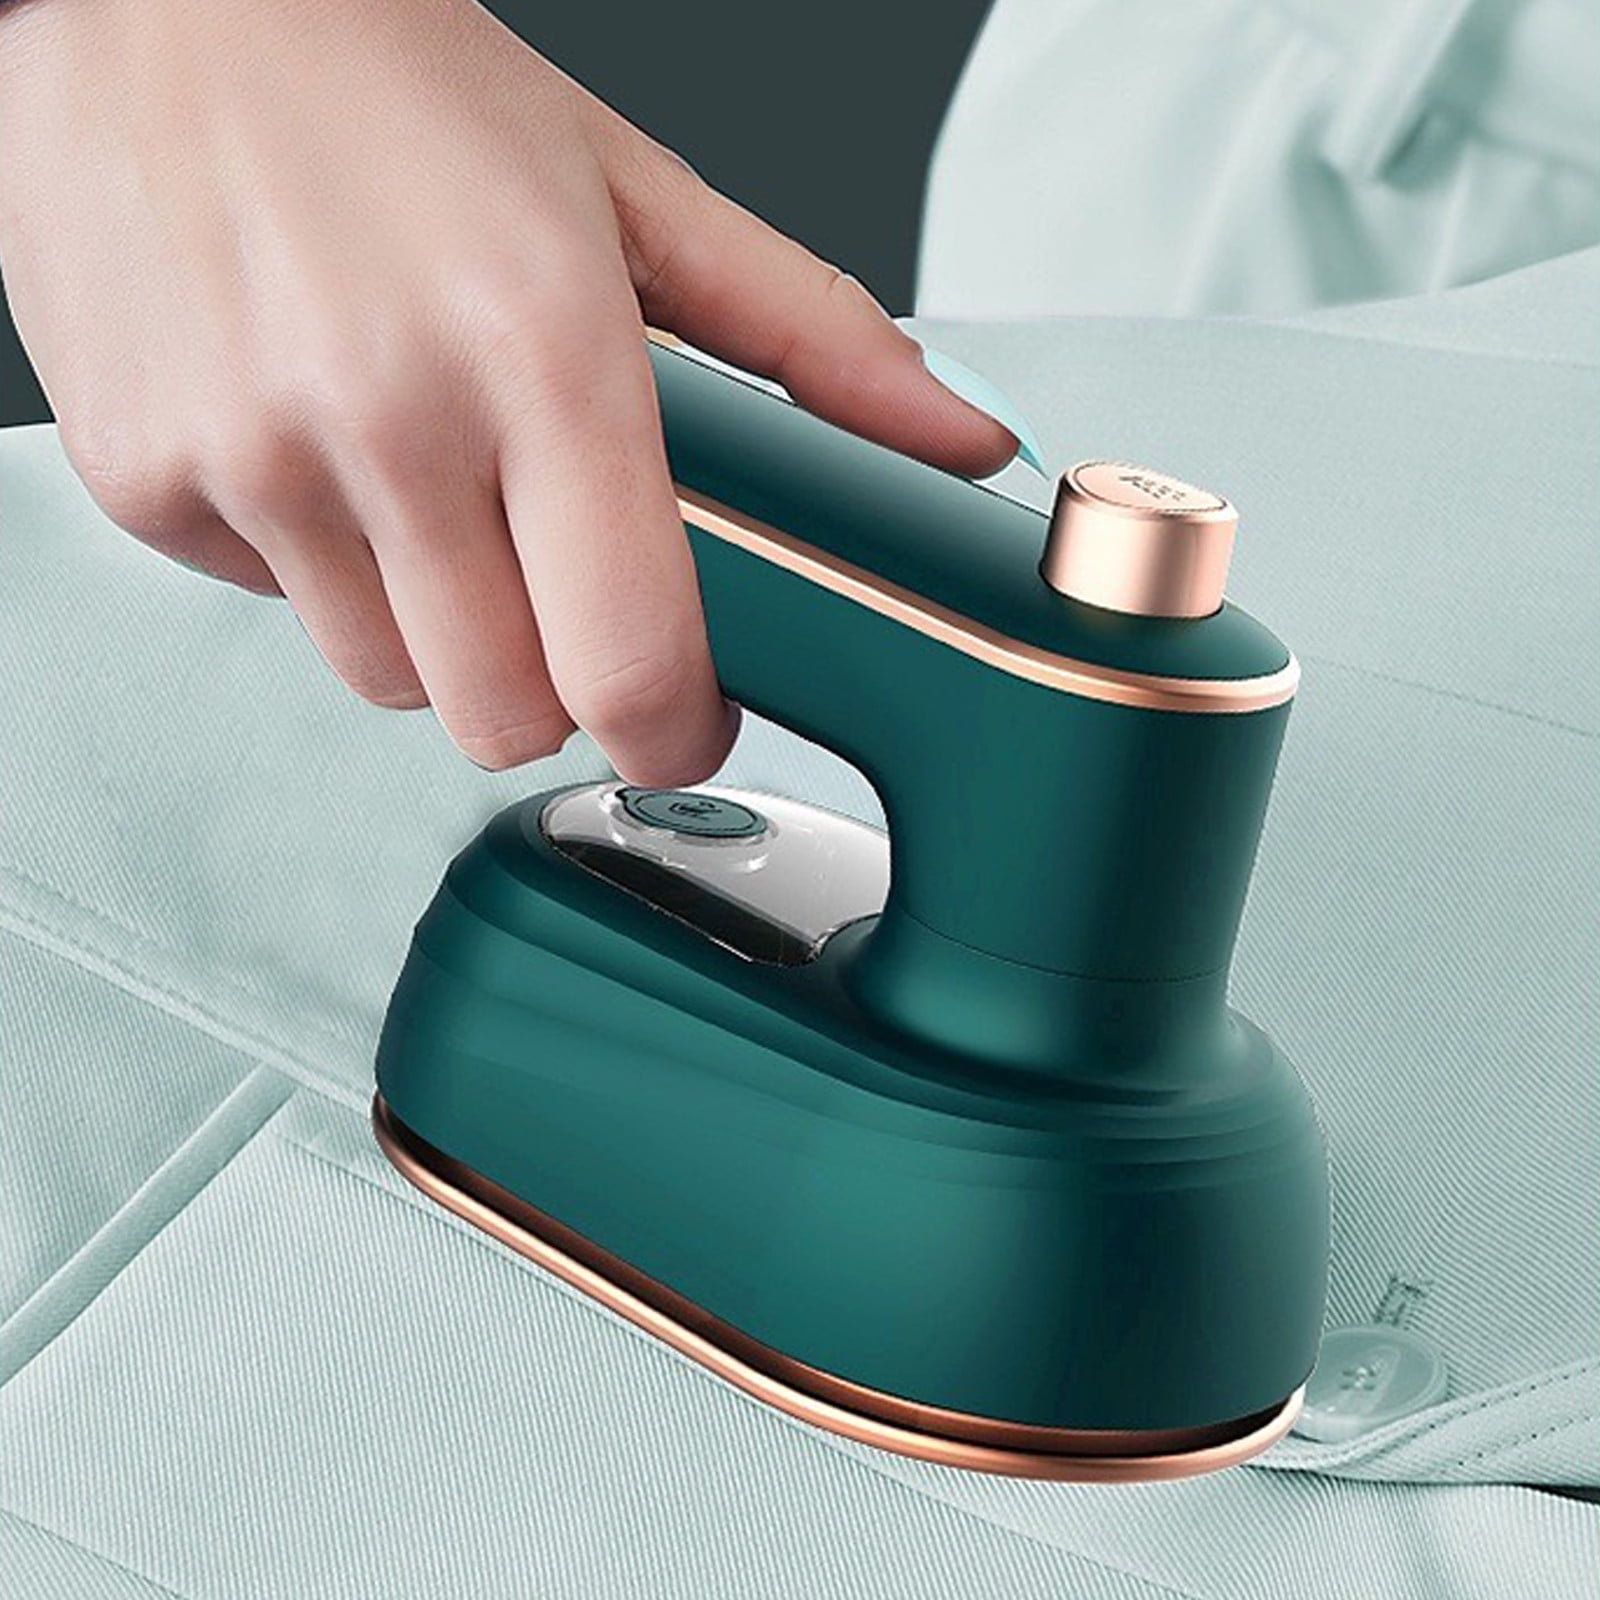 Kokovifyves Automatic Ironing Machine for Clothes Upgrade Portable Mini  Ironing Machine, 180°Rotatable Handheld Steam Iron, Good for Home and Travel